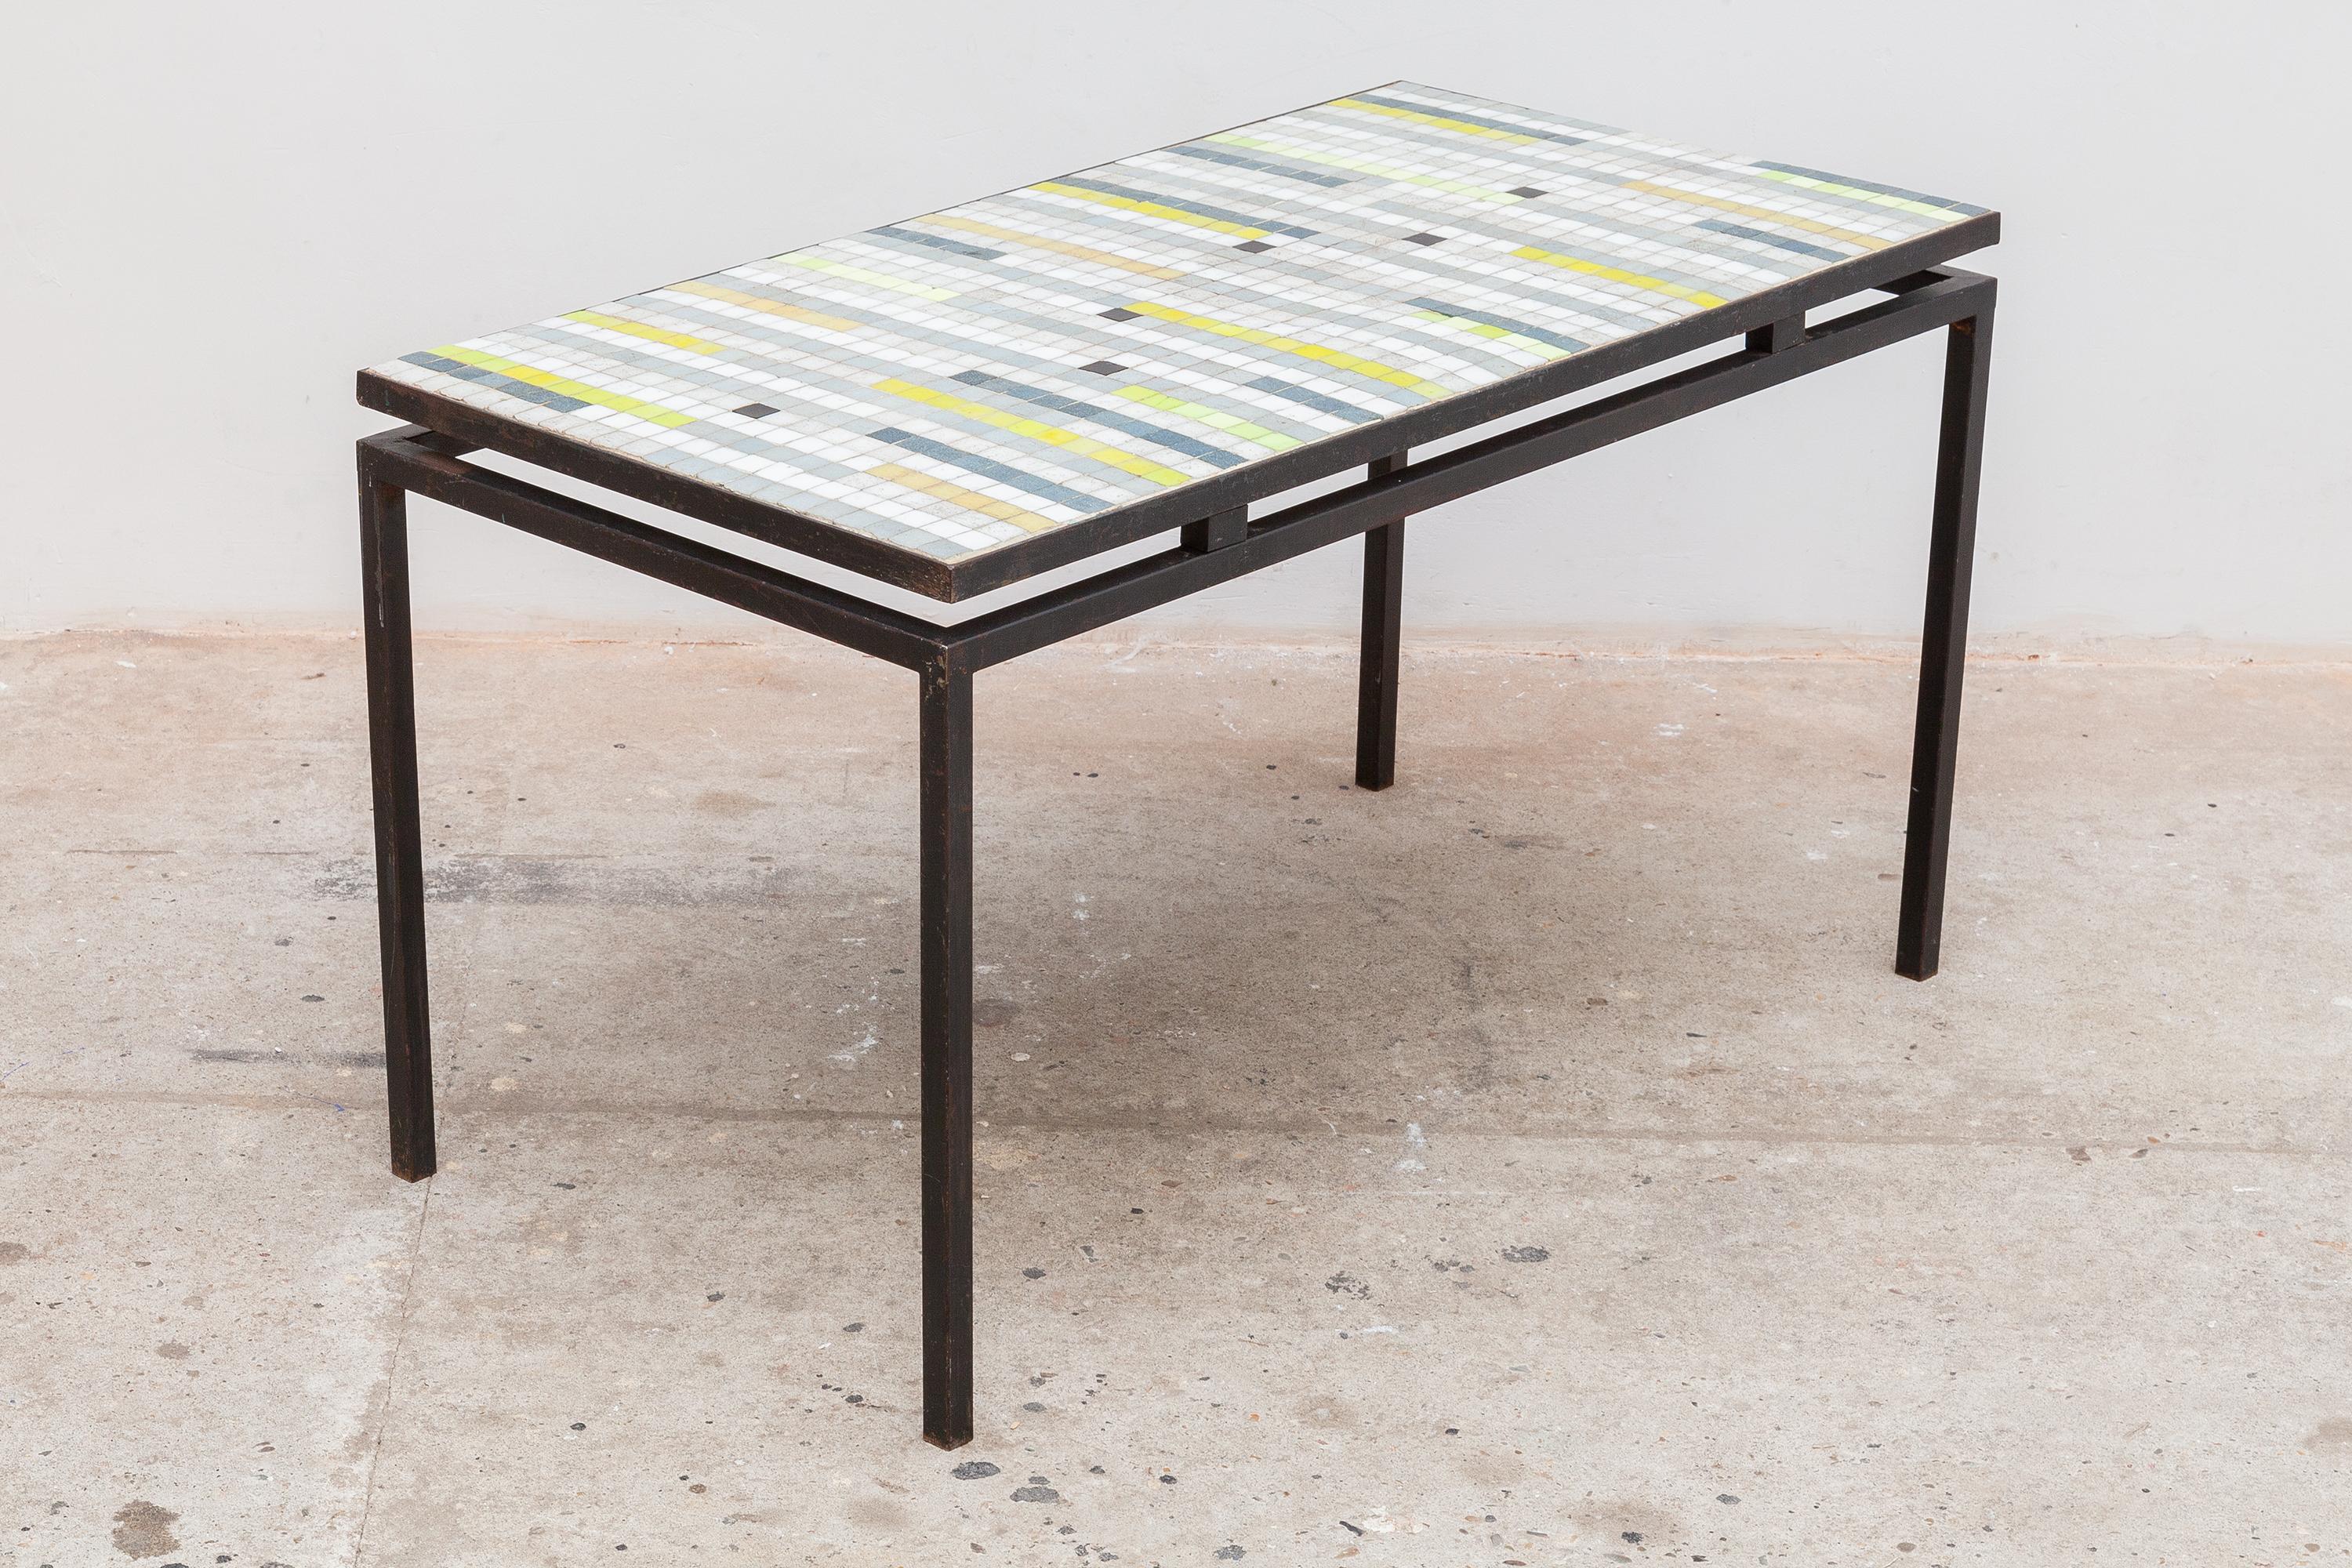 Vintage midcentury mosaic tile table. Striped design with neutral stone tile striped with blues and neon yellow. Floating iron frame.
Dimensions: 91 W x 50 H x 47 D cm.